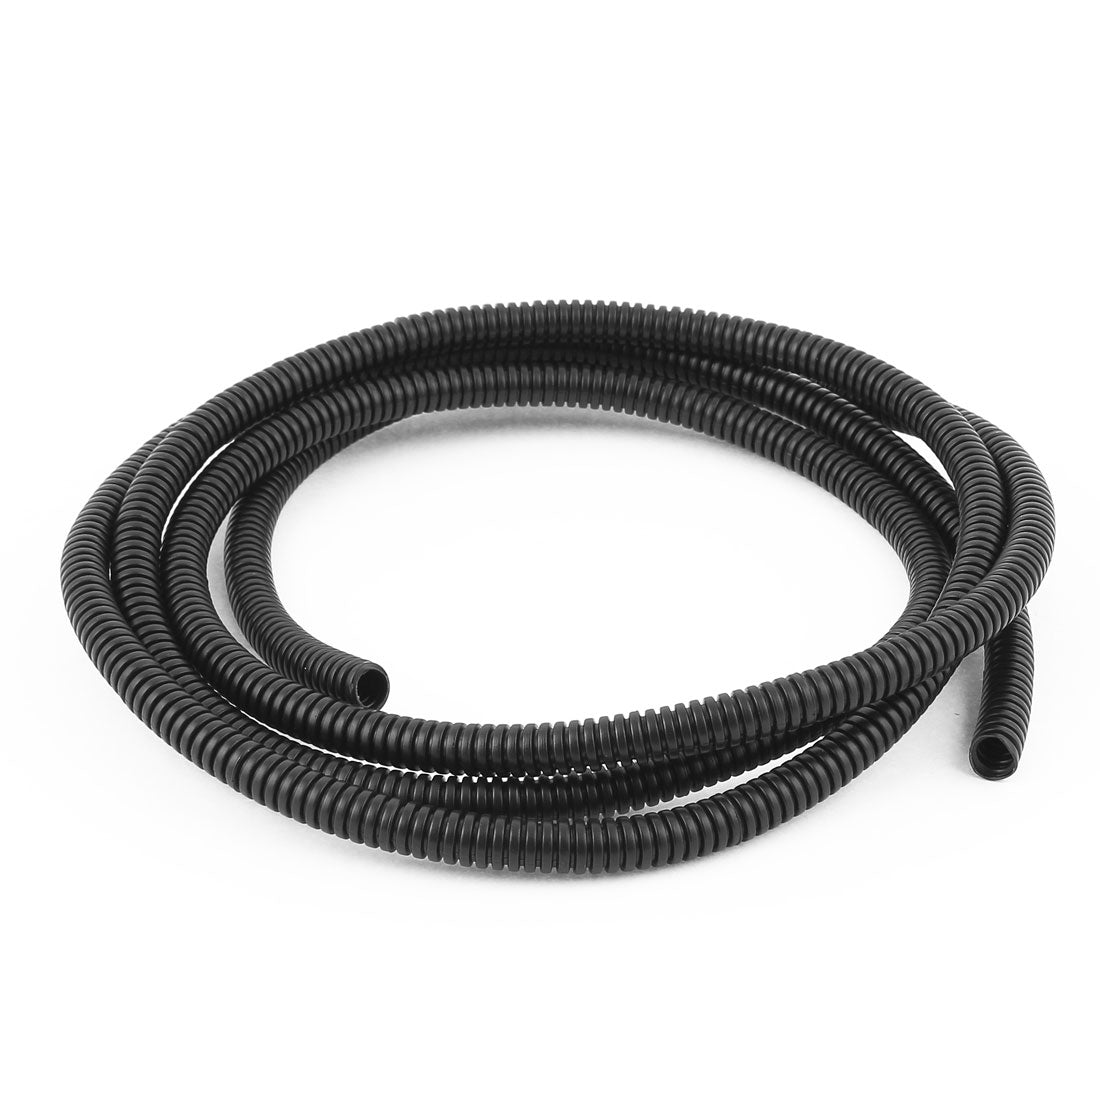 uxcell Uxcell 2 M 8 x 10 mm Plastic Flexible Corrugated Conduit Tube for Garden,Office Black